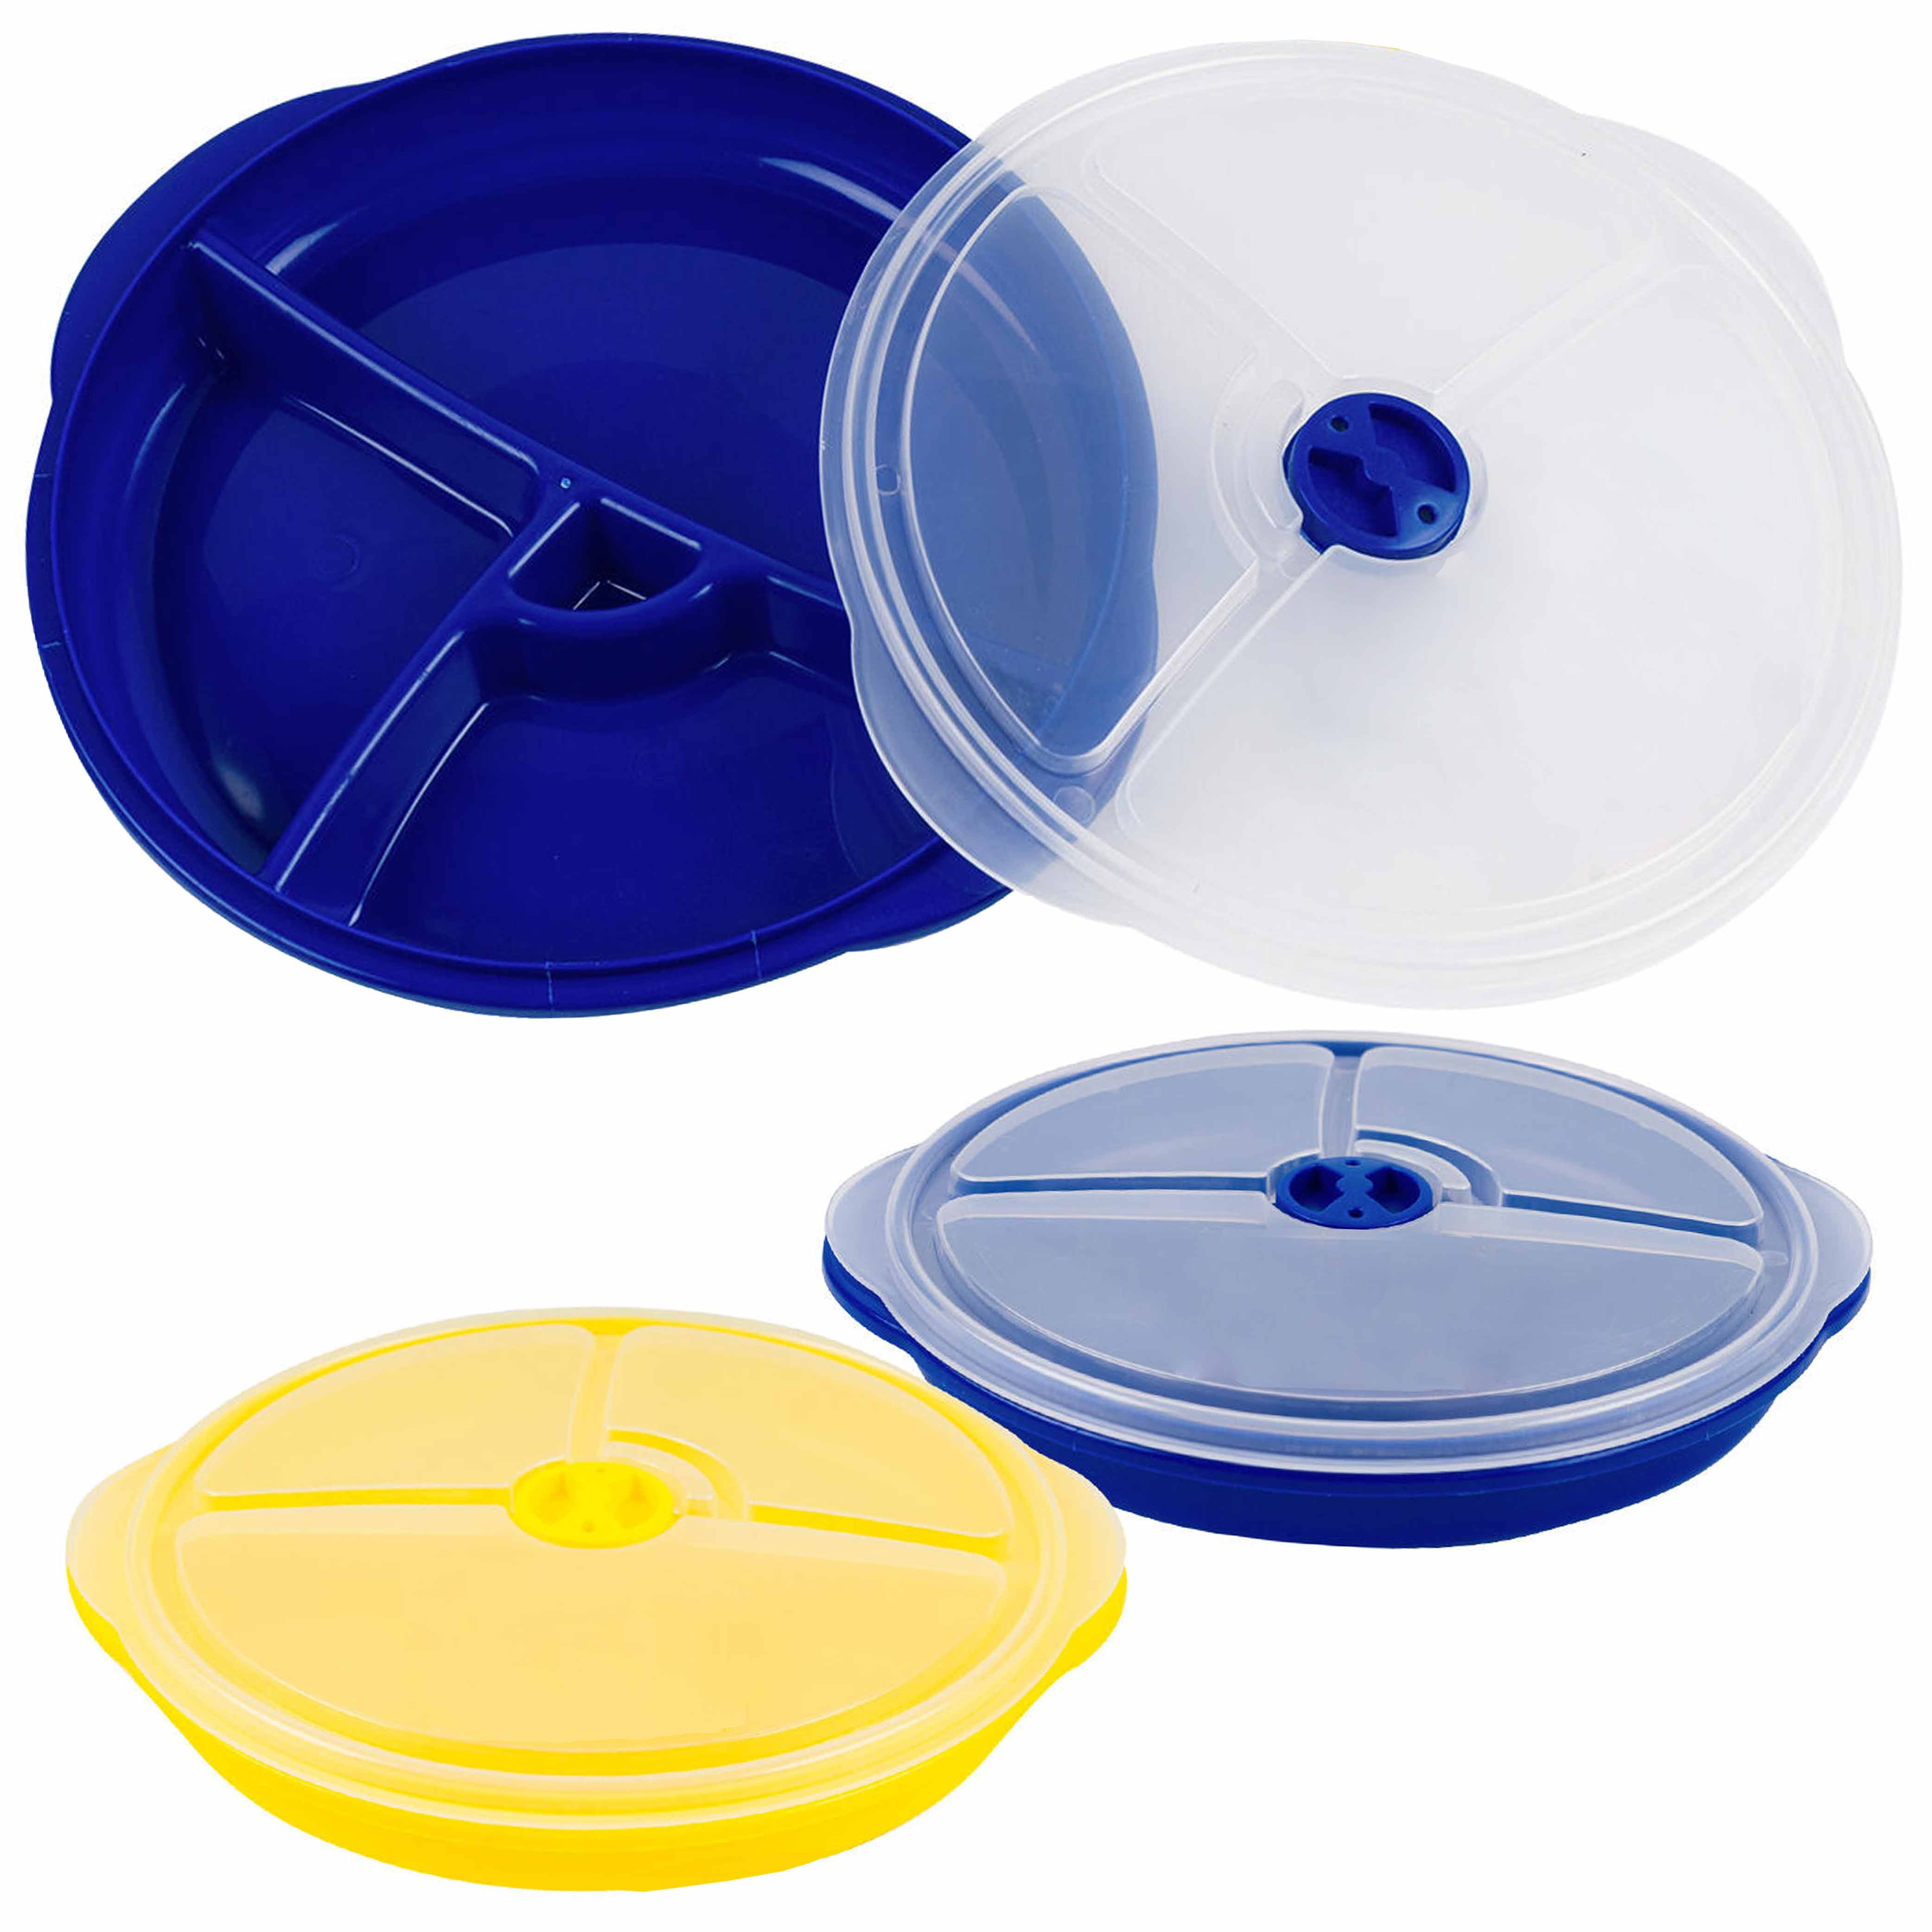 Healthy Portion Control Plate BPA Free 3-Section w Lid Dishwasher Microwave  Safe